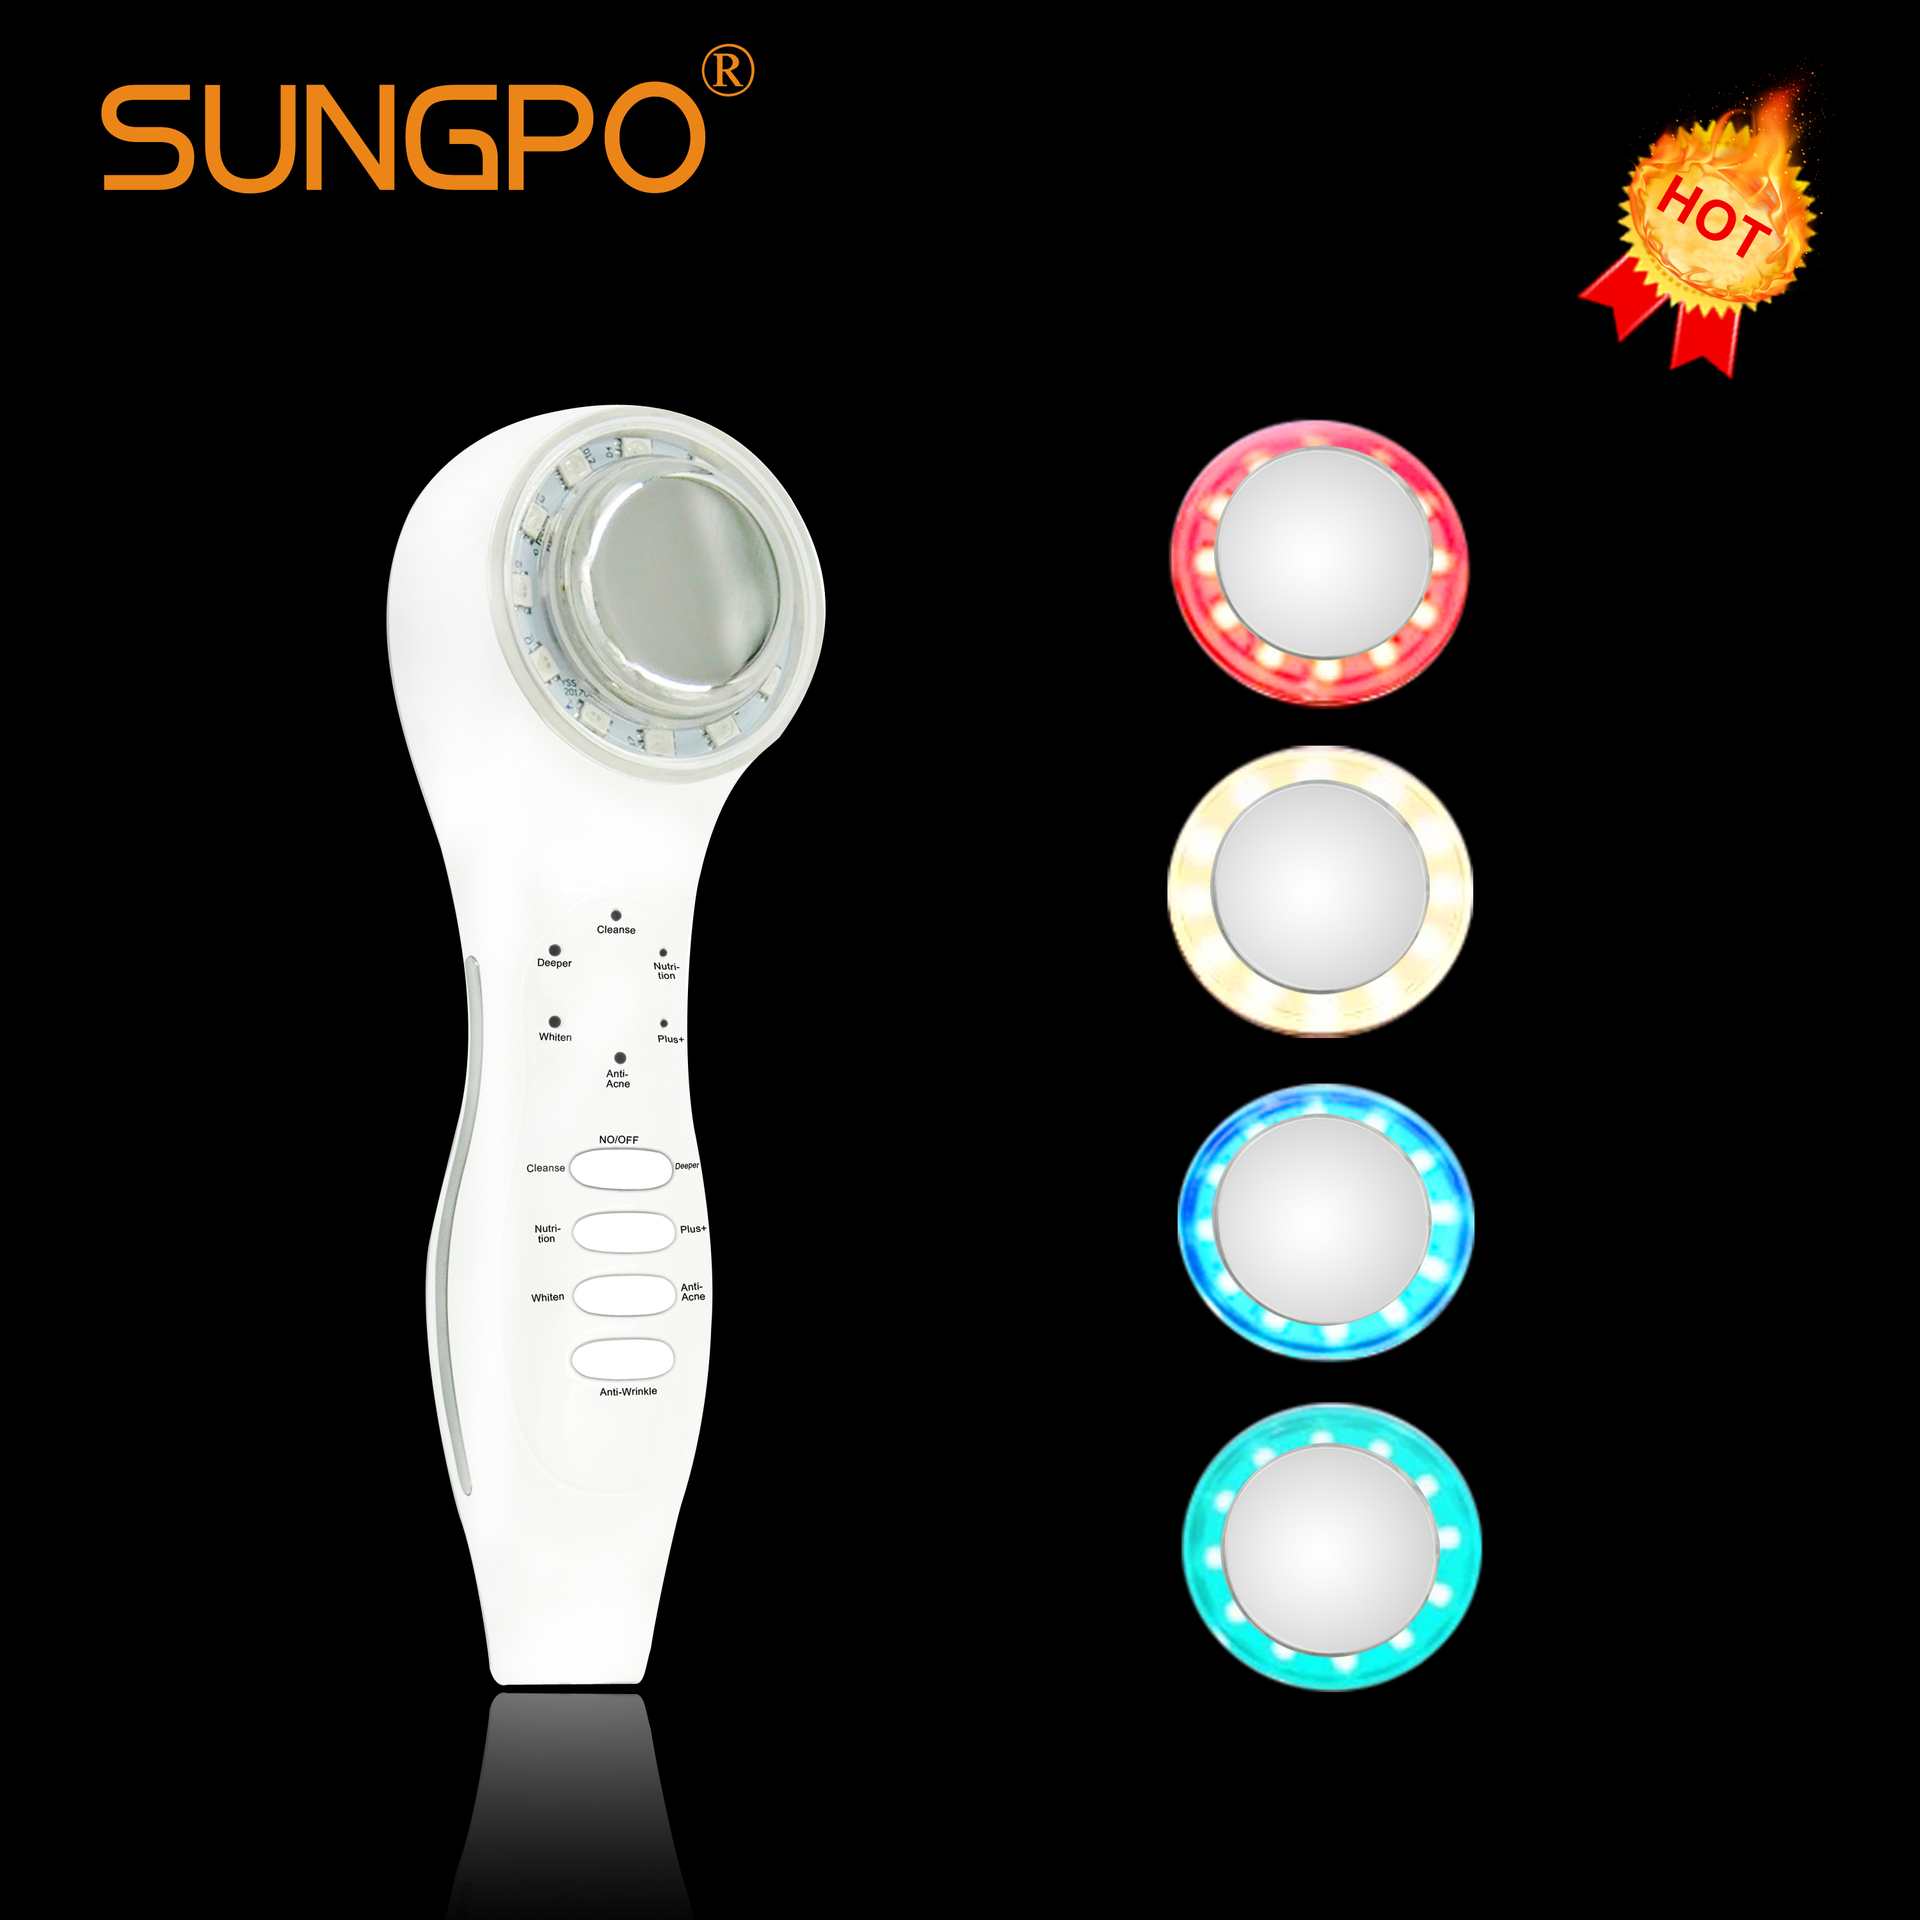 best sellers in europe 2019 new technology new arrivals trending popular beauty personal care skin care product